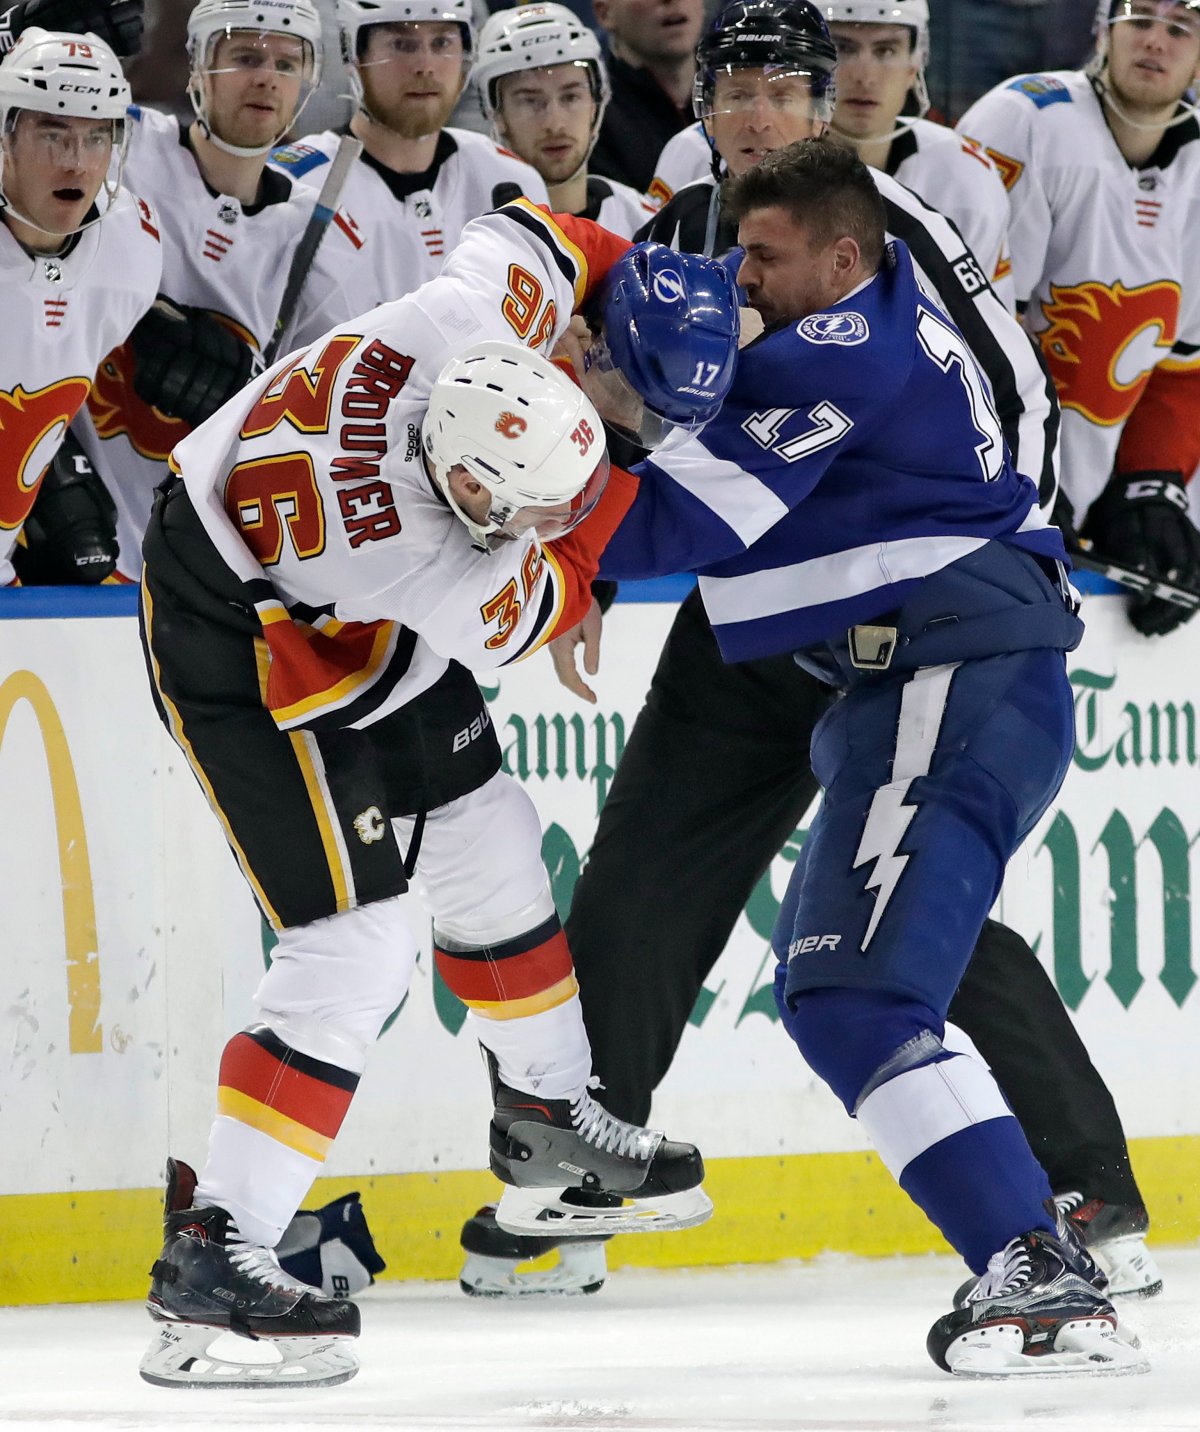 Calgary Flames right wing Troy Brouwer (36) and Tampa Bay Lightning left wing Alex Killorn (17) fight during the first period of an NHL hockey game Thursday, Jan. 11, 2018, in Tampa, Fla. Both players were given fighting major penalties. (AP Photo/Chris O'Meara).